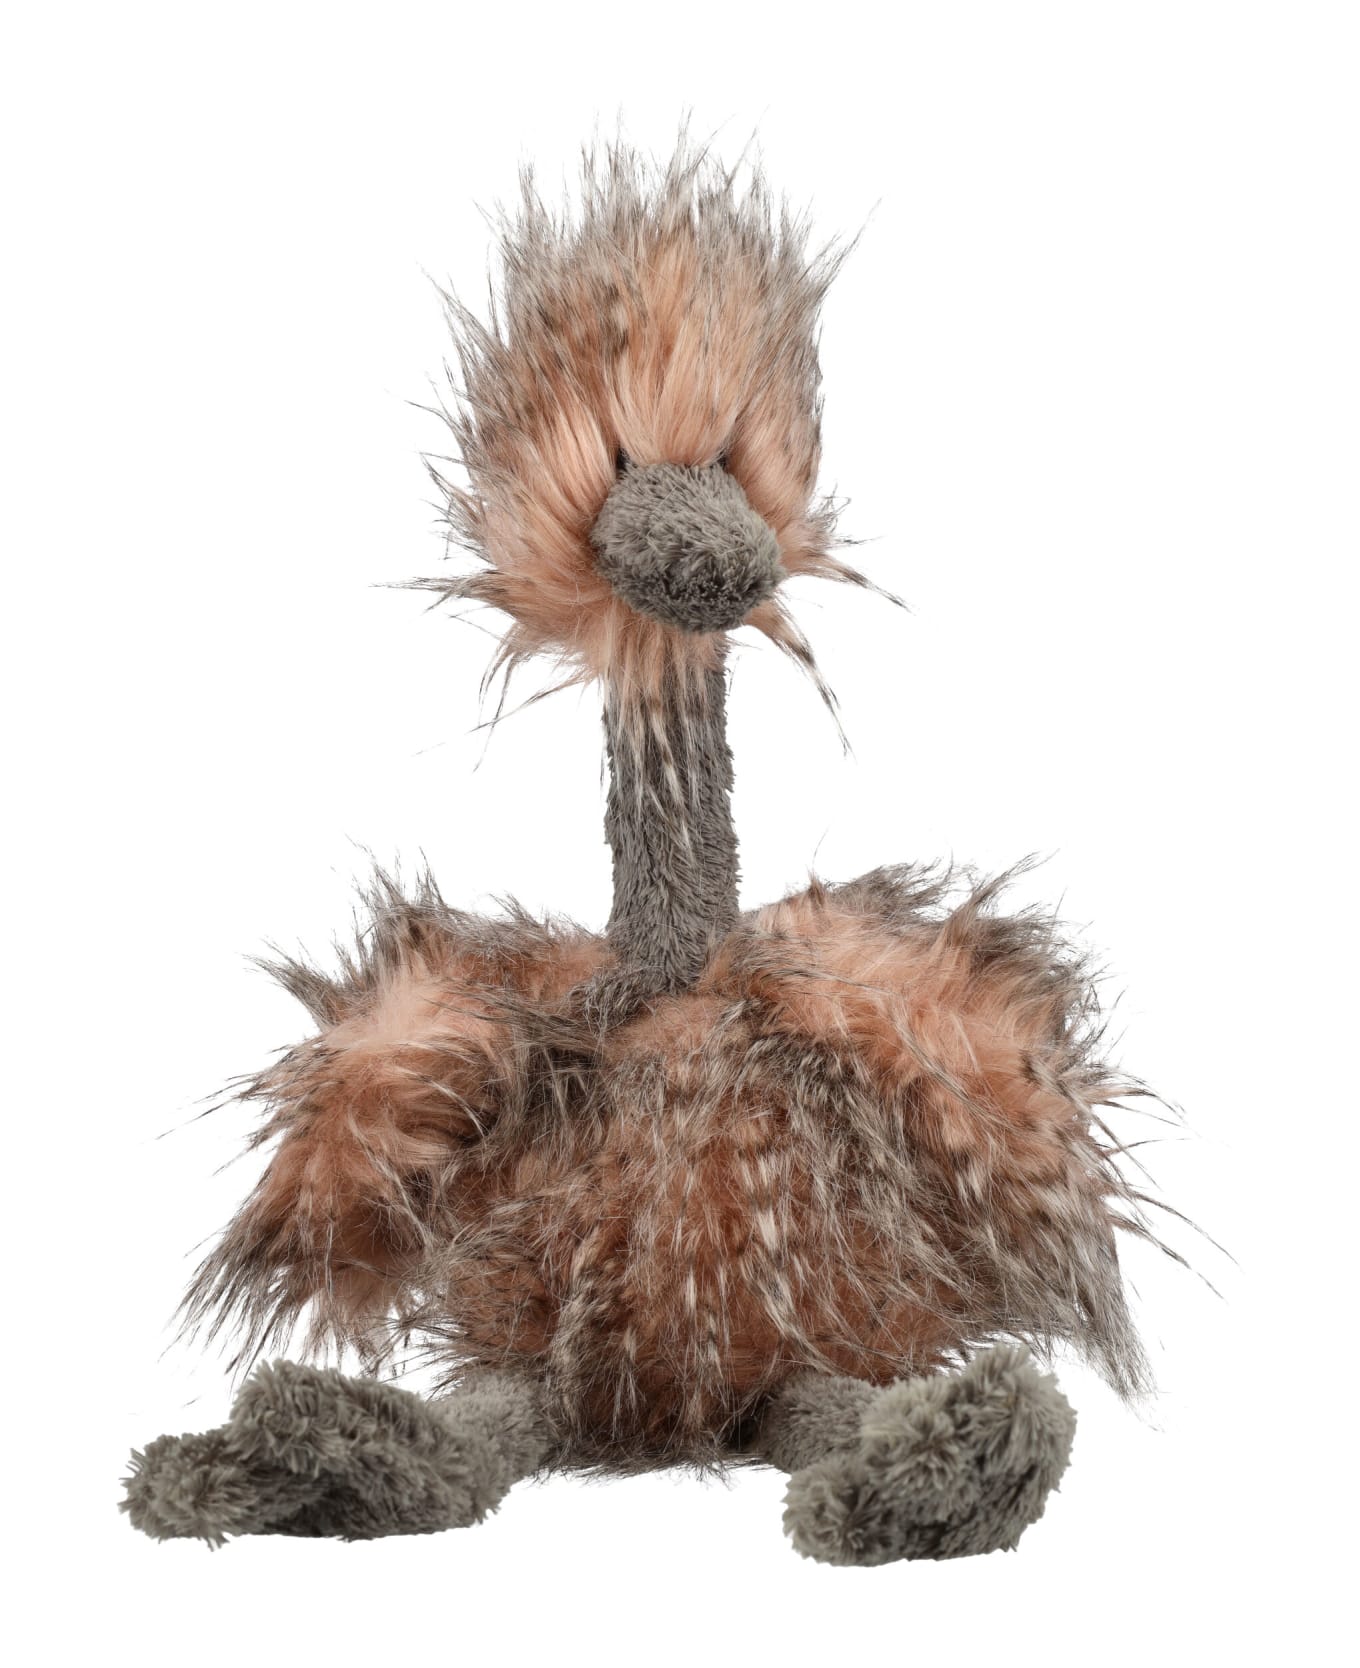 Bonpoint Odette Ostrich Cuddly Toy - UPB ROSE POUDRE アクセサリー＆ギフト